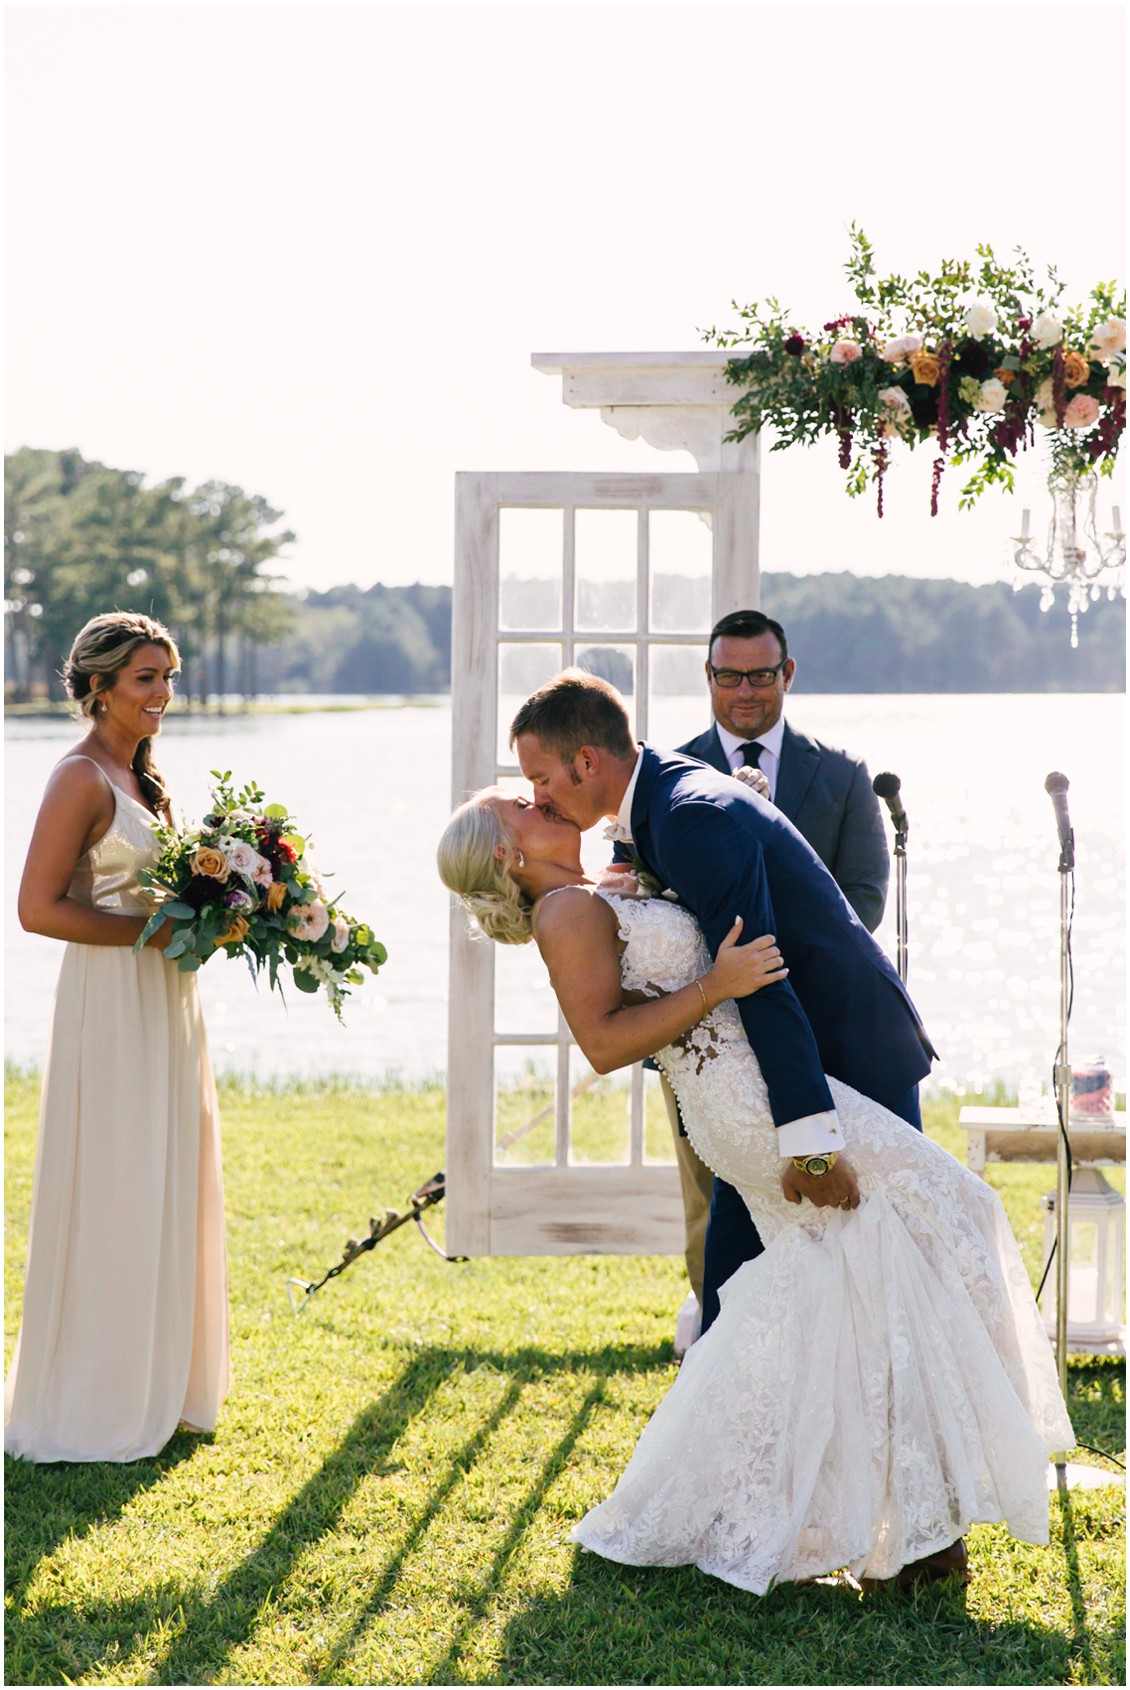 Bride and groom first kiss after outdoor wedding ceremony | Kingsbay Mansion| My Eastern Shore Wedding